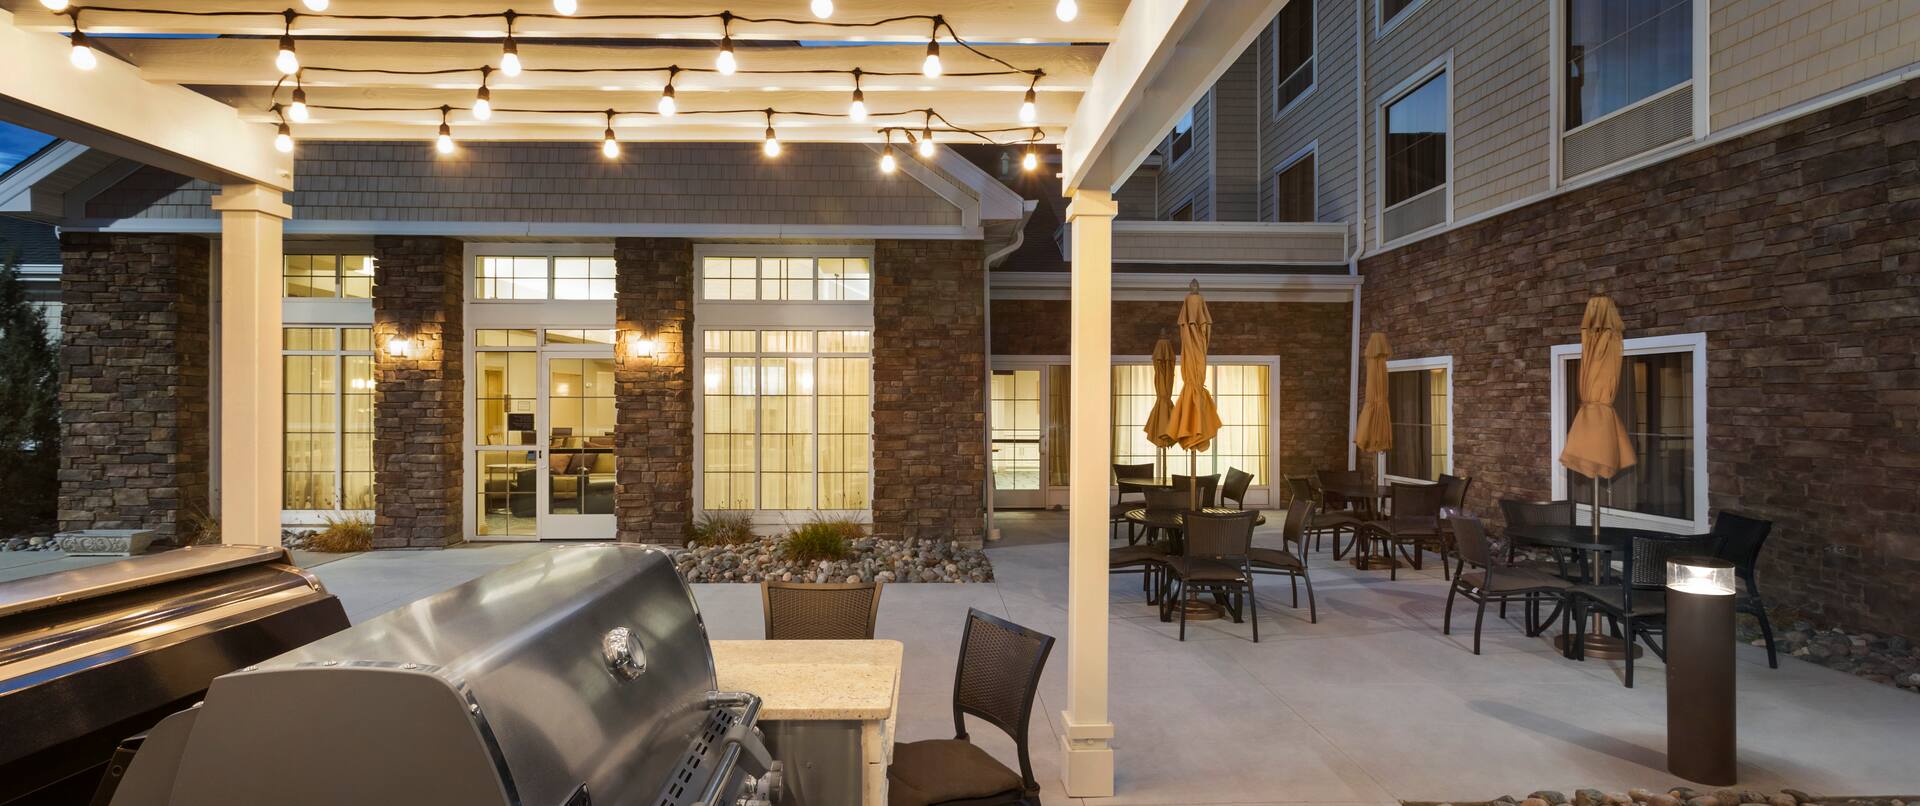 Patio with BBQ Grills